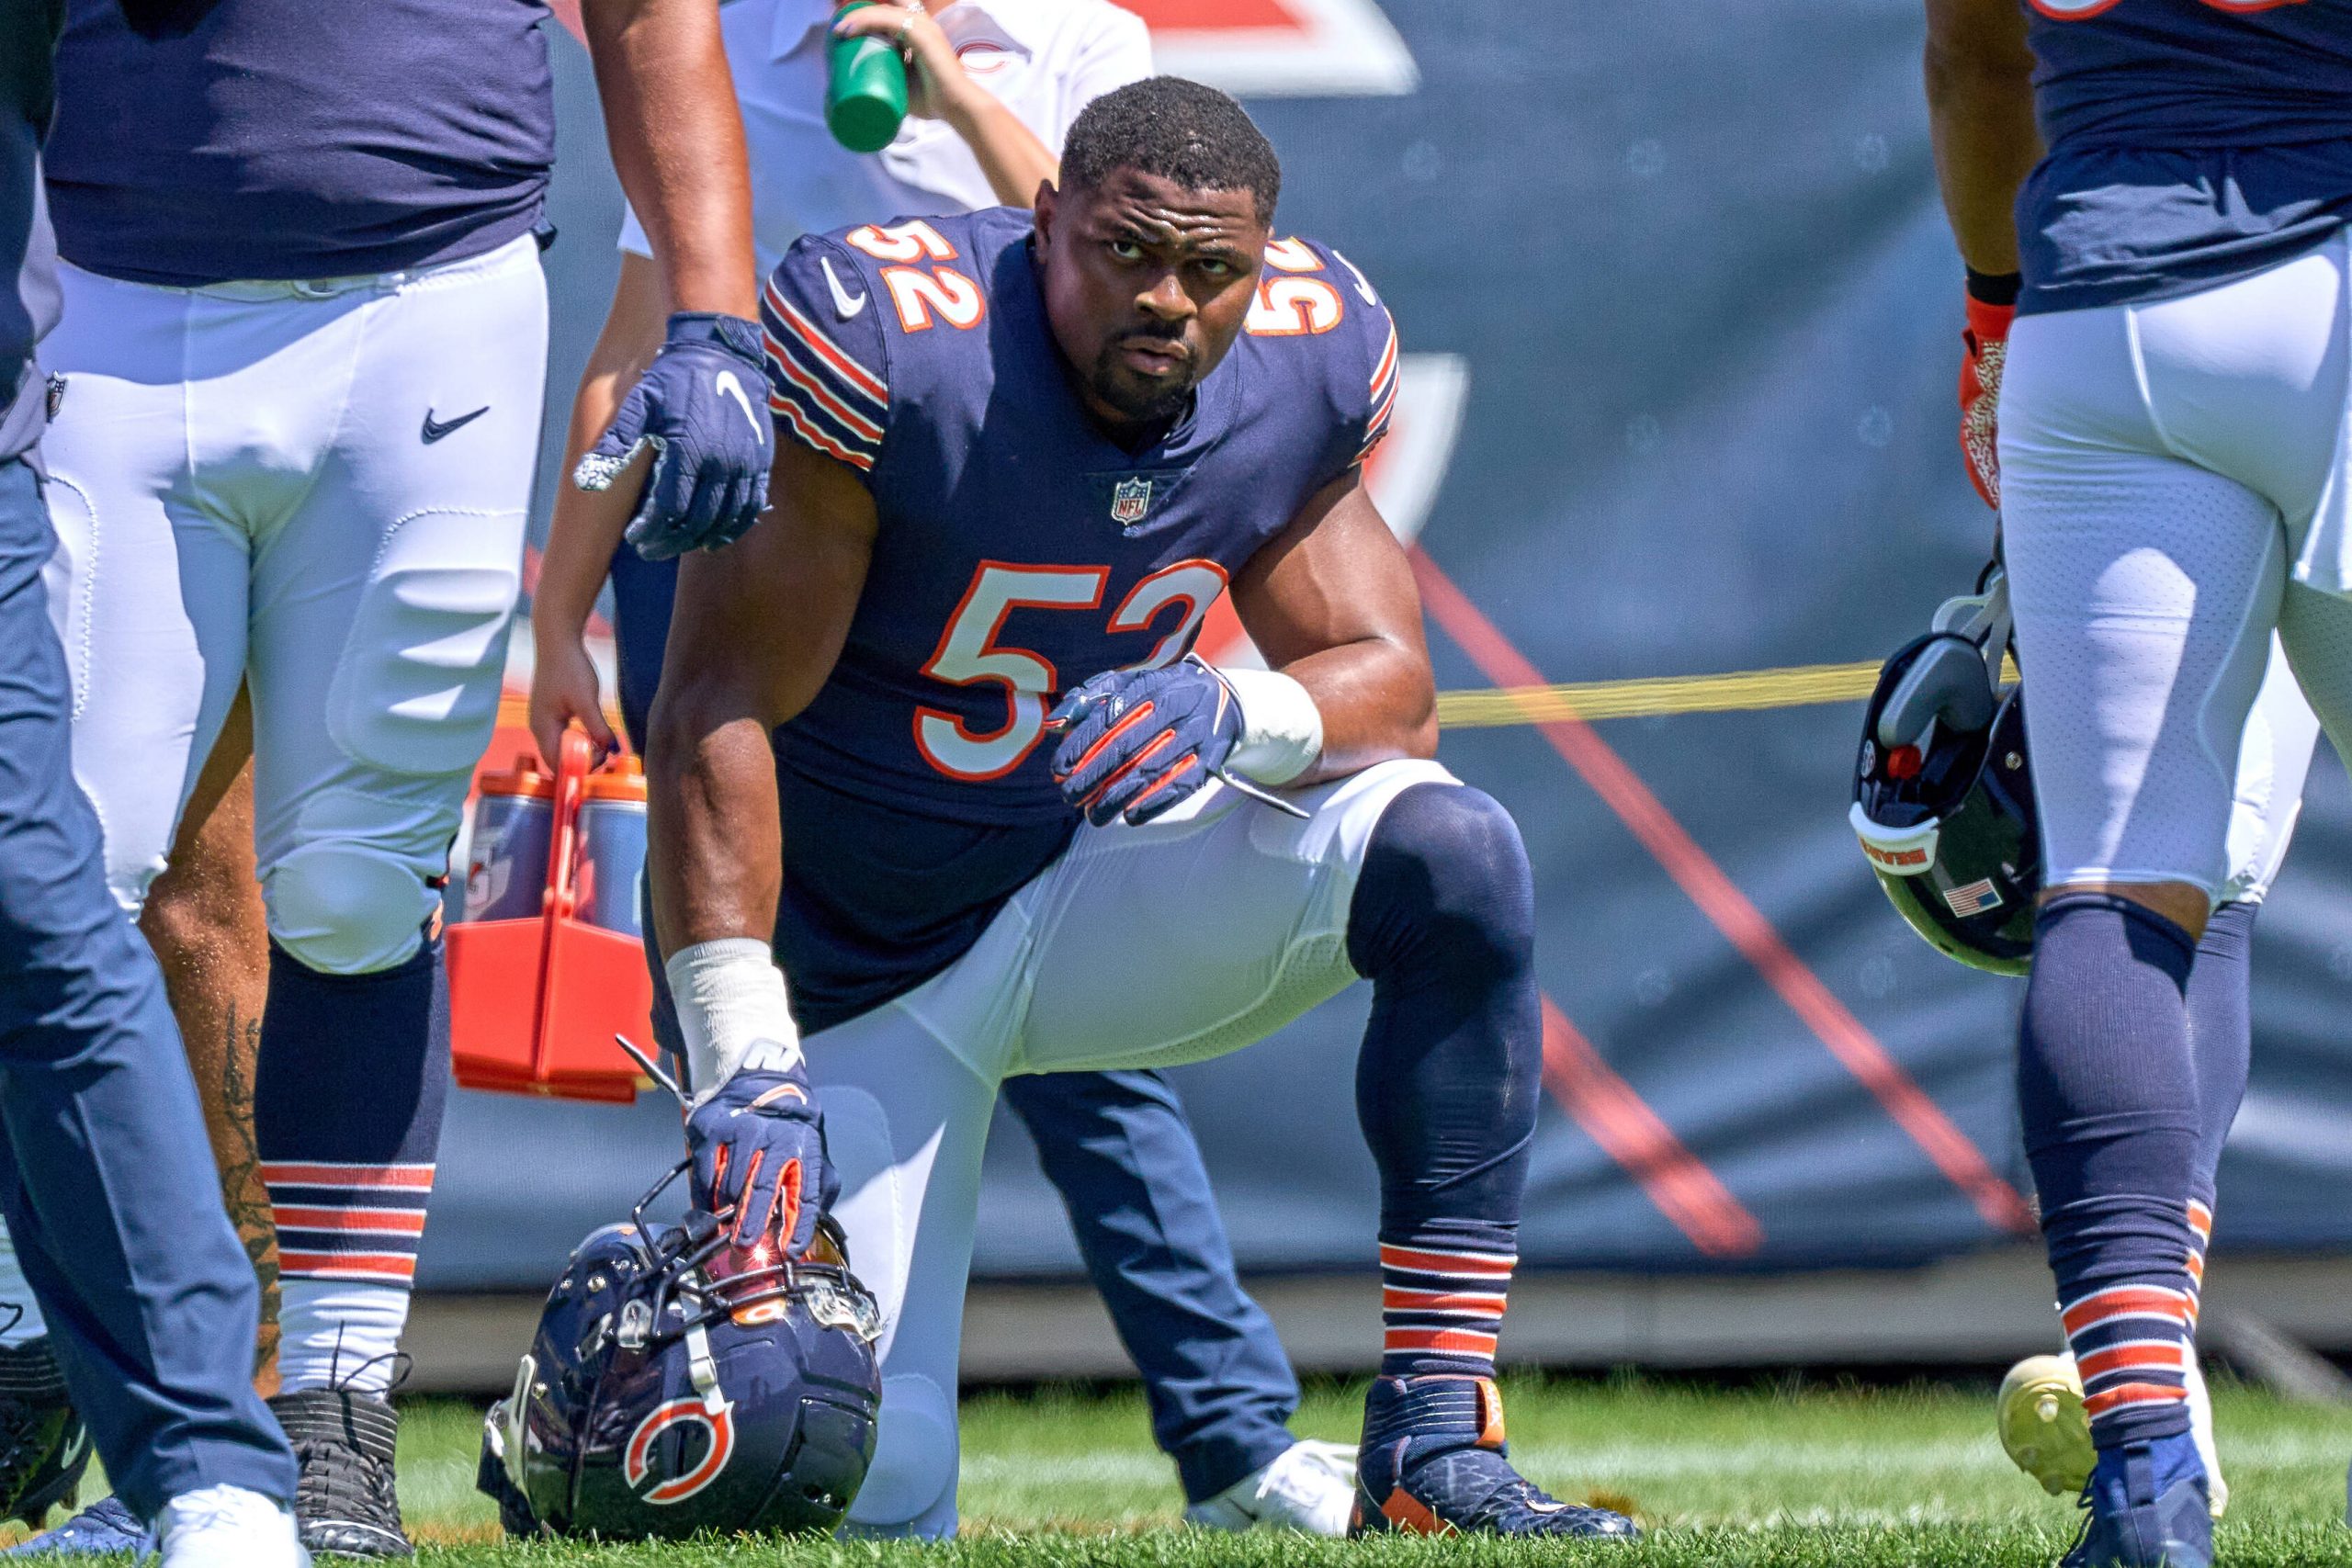 CHICAGO, IL - AUGUST 14: Chicago Bears outside linebacker Khalil Mack (52) looks on during a preseason game between the